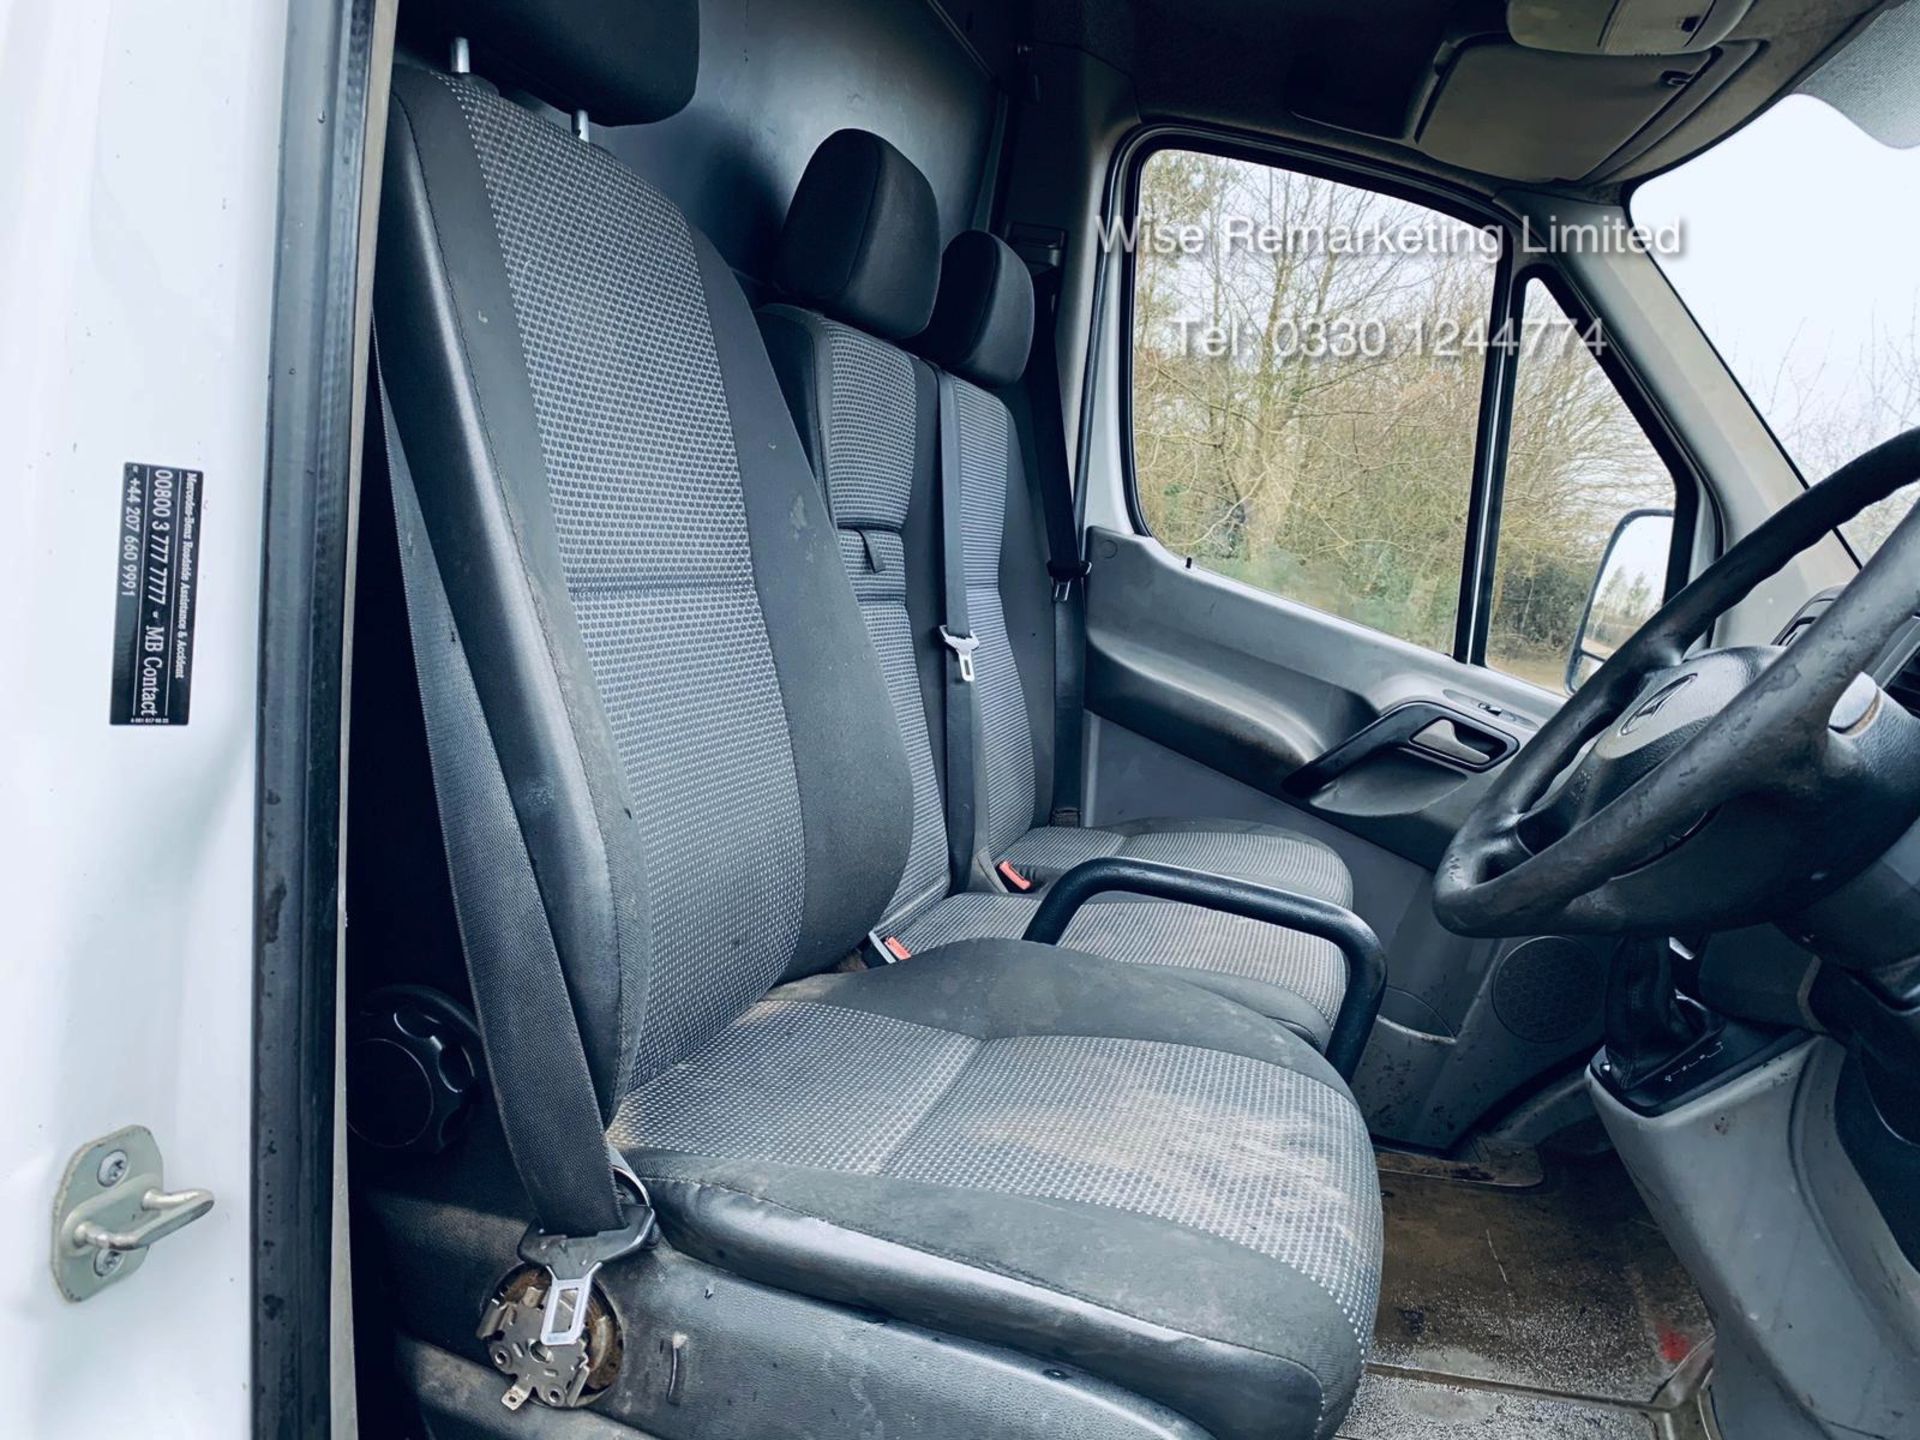 Mercedes Sprinter 313 2.1 CDI *Automatic Triptronic Gearbox* - 2011 Model - Ply Lined - Image 9 of 15